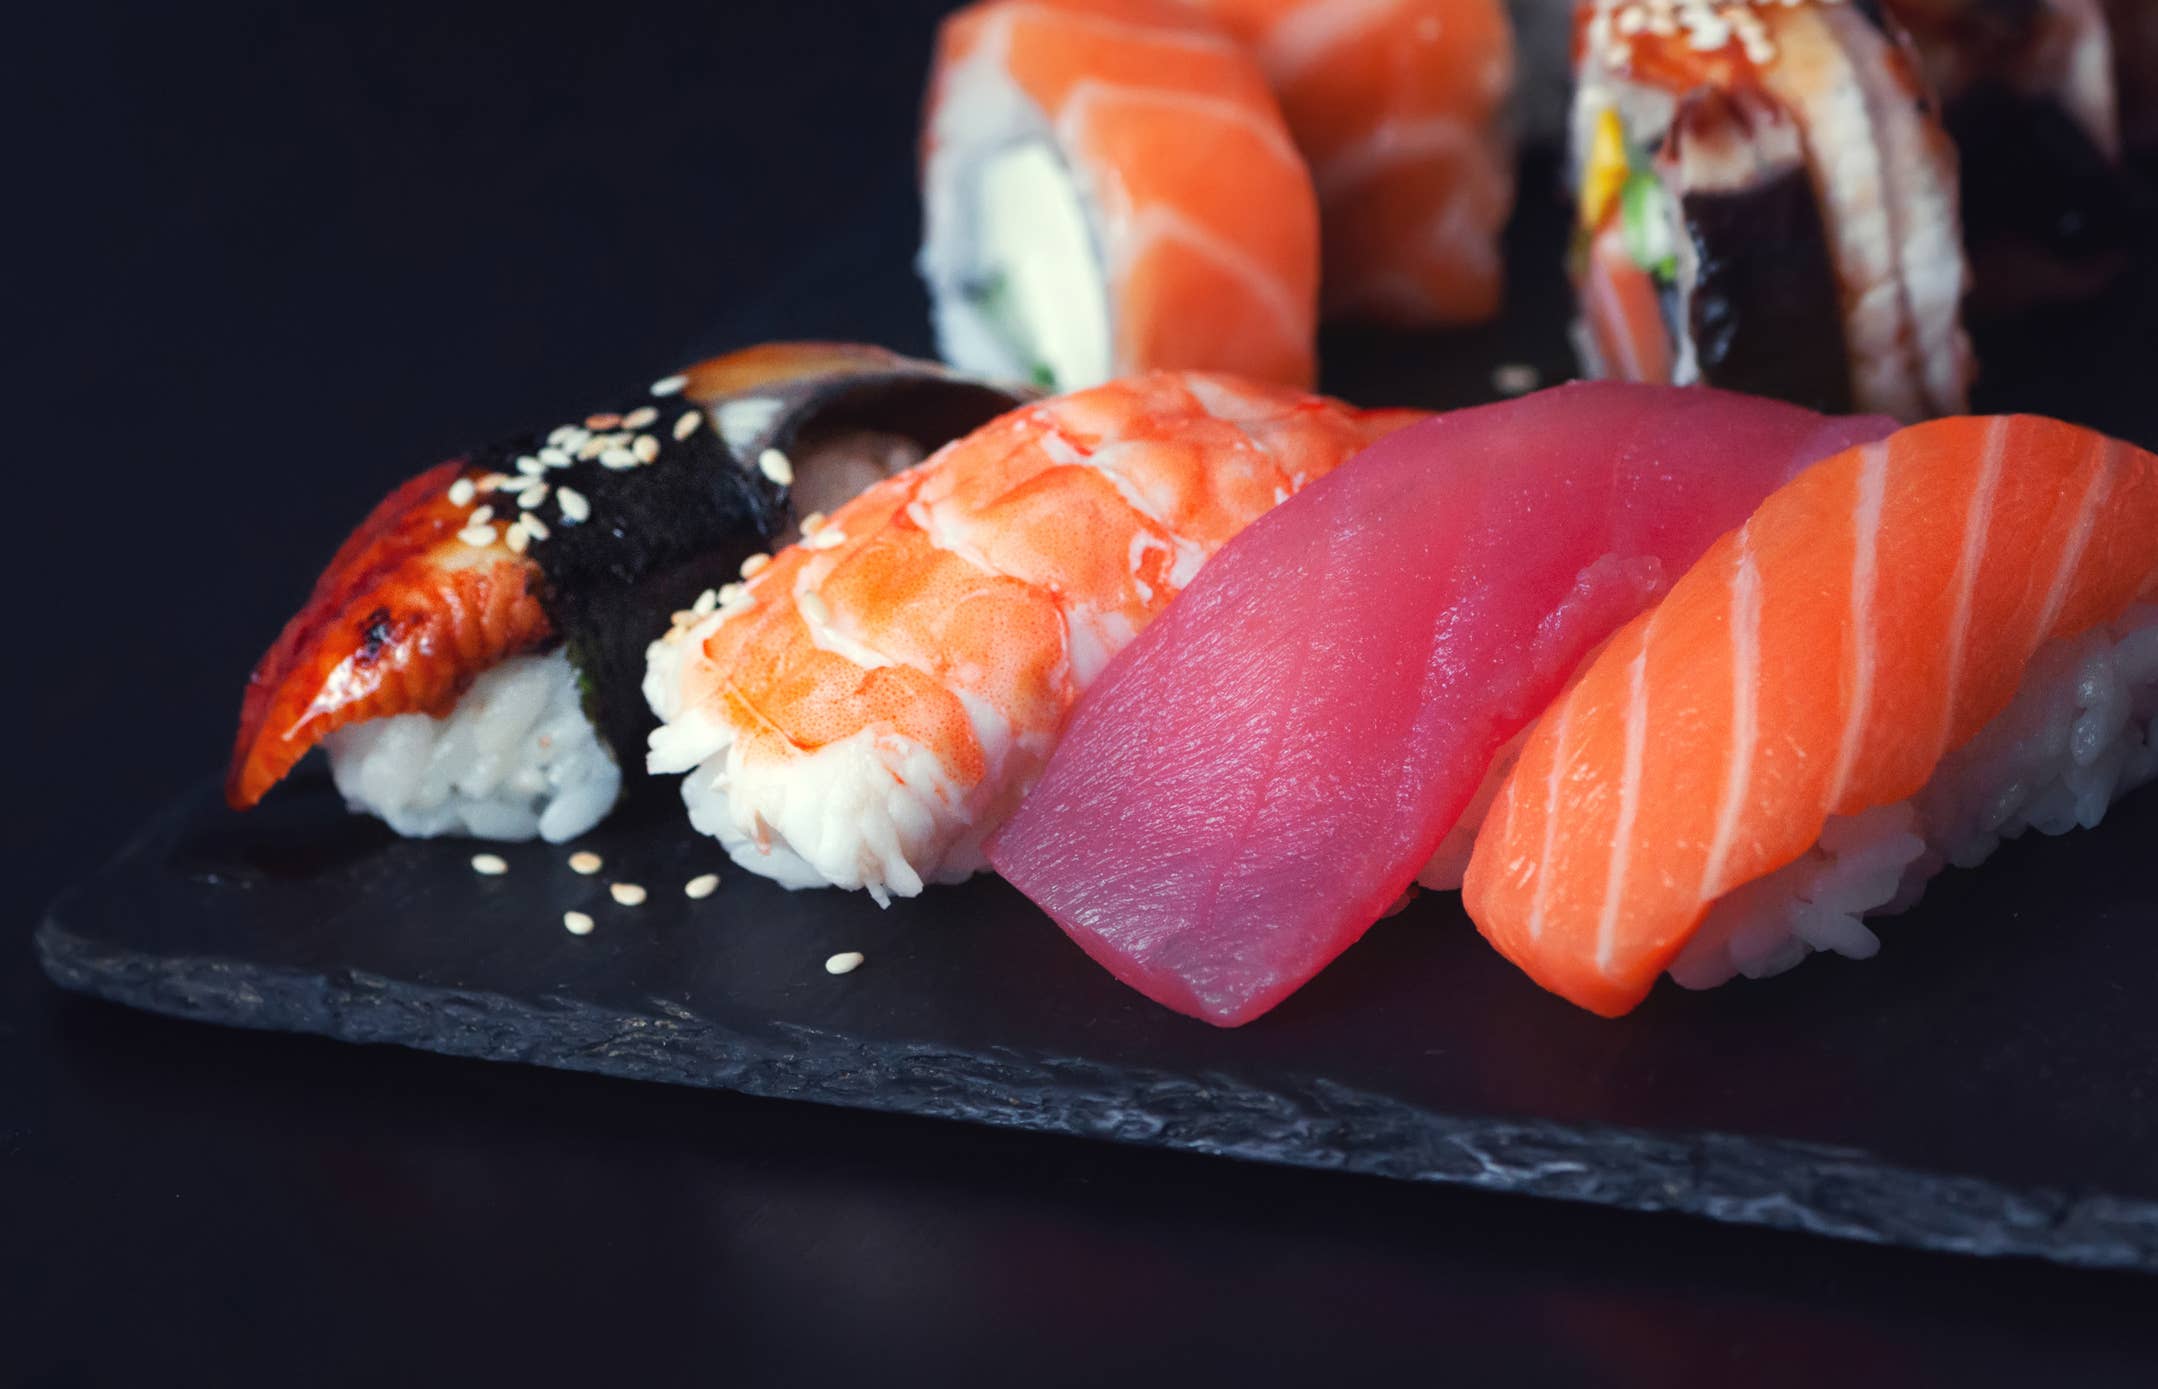 What is the term for the small dish of soy sauce served with sushi?